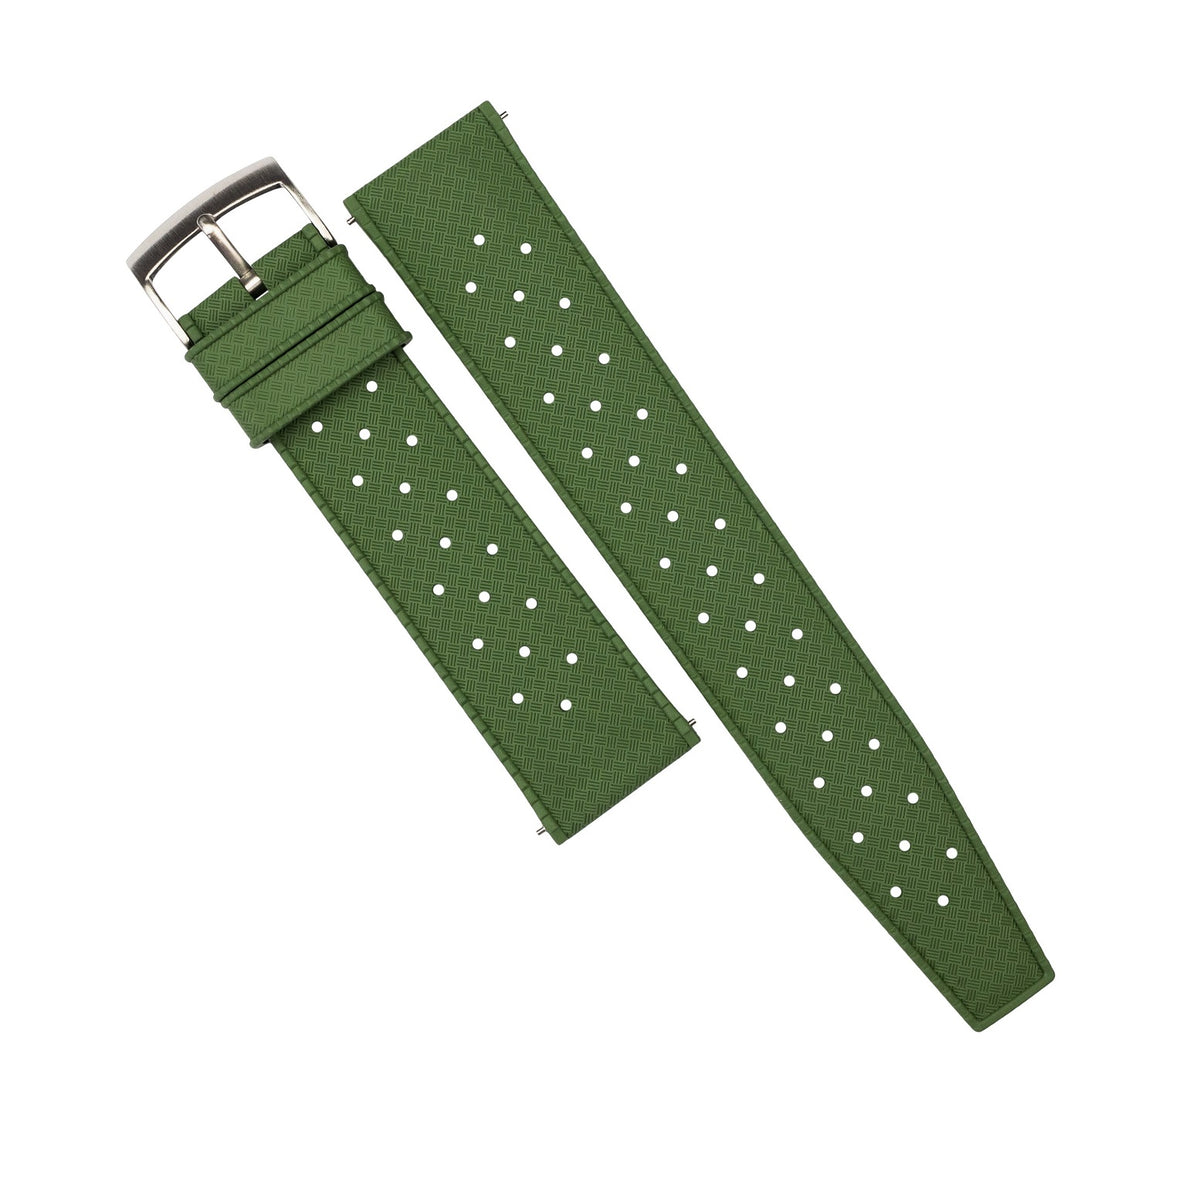 Tropic FKM Rubber Strap in Green (20mm) - Nomad Watch Works Malaysia